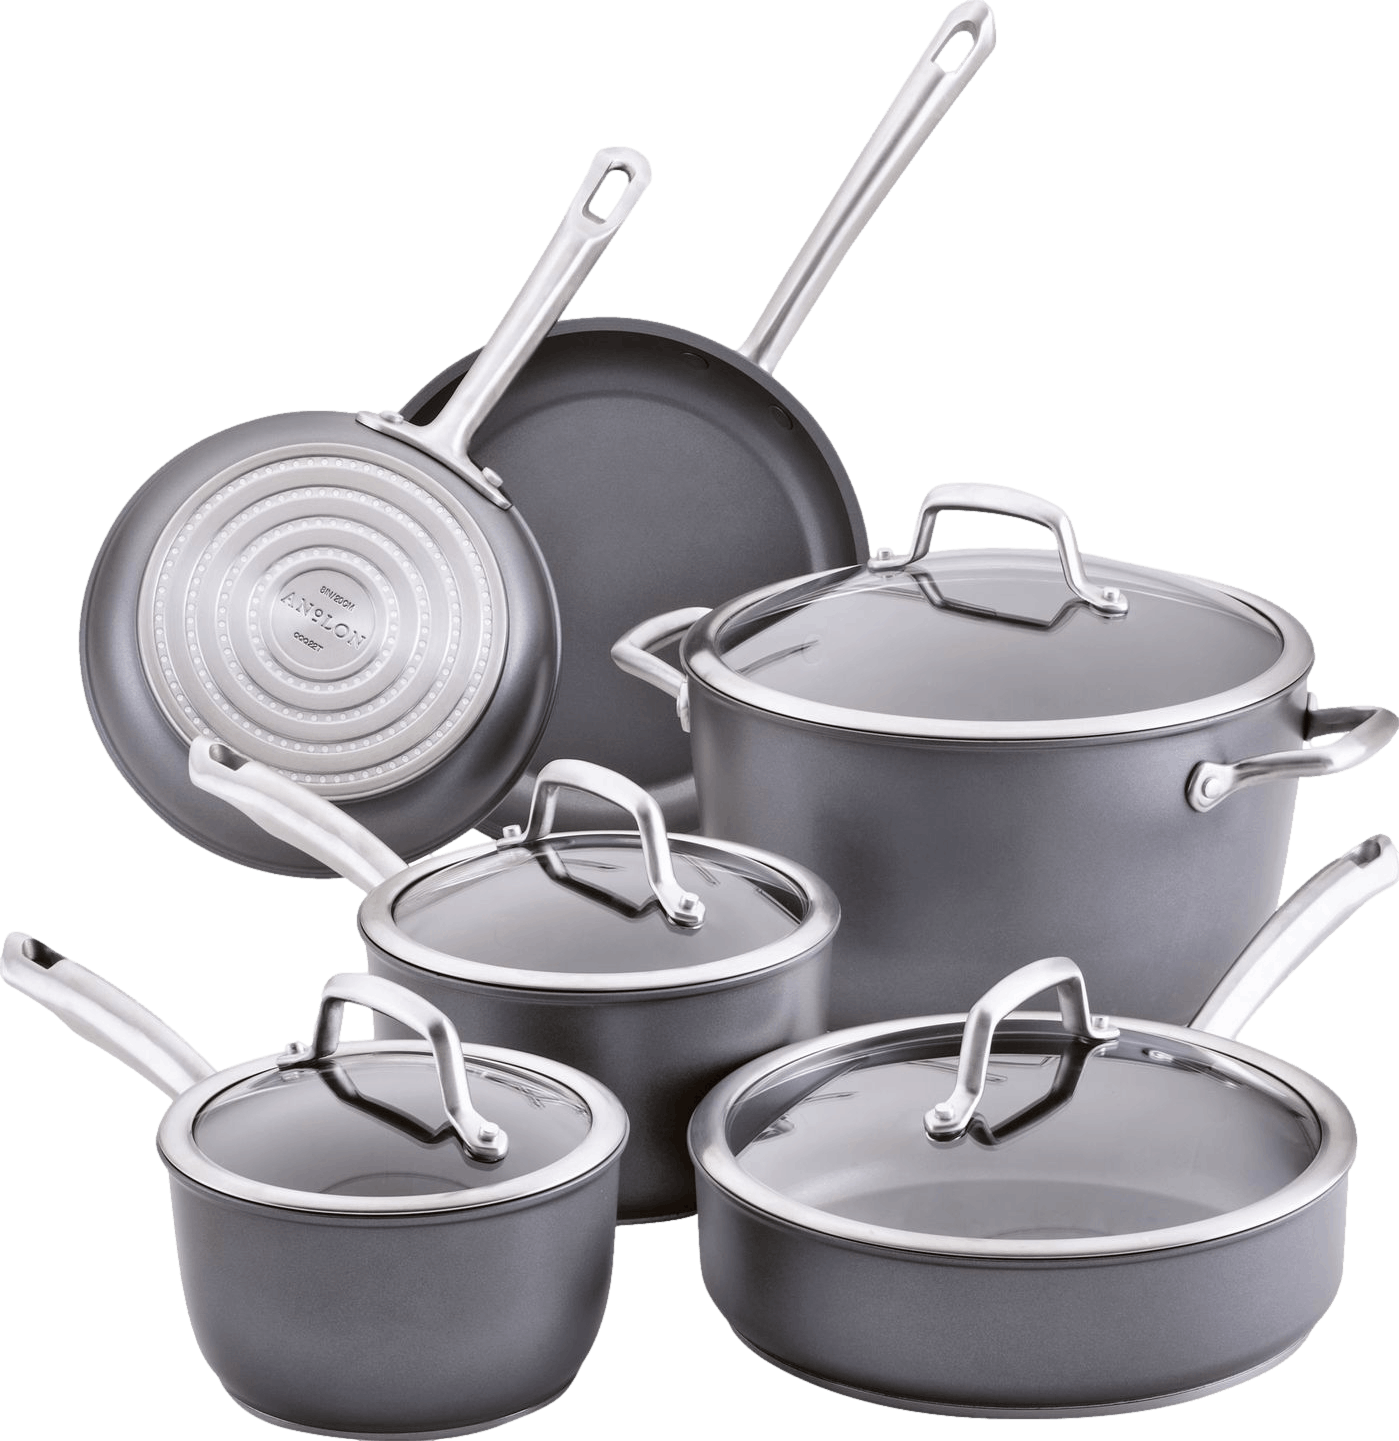 Anolon Accolade Hard Anodized Nonstick Cookware Induction Pots and Pans Set  · 10 Piece Set - Moonstone